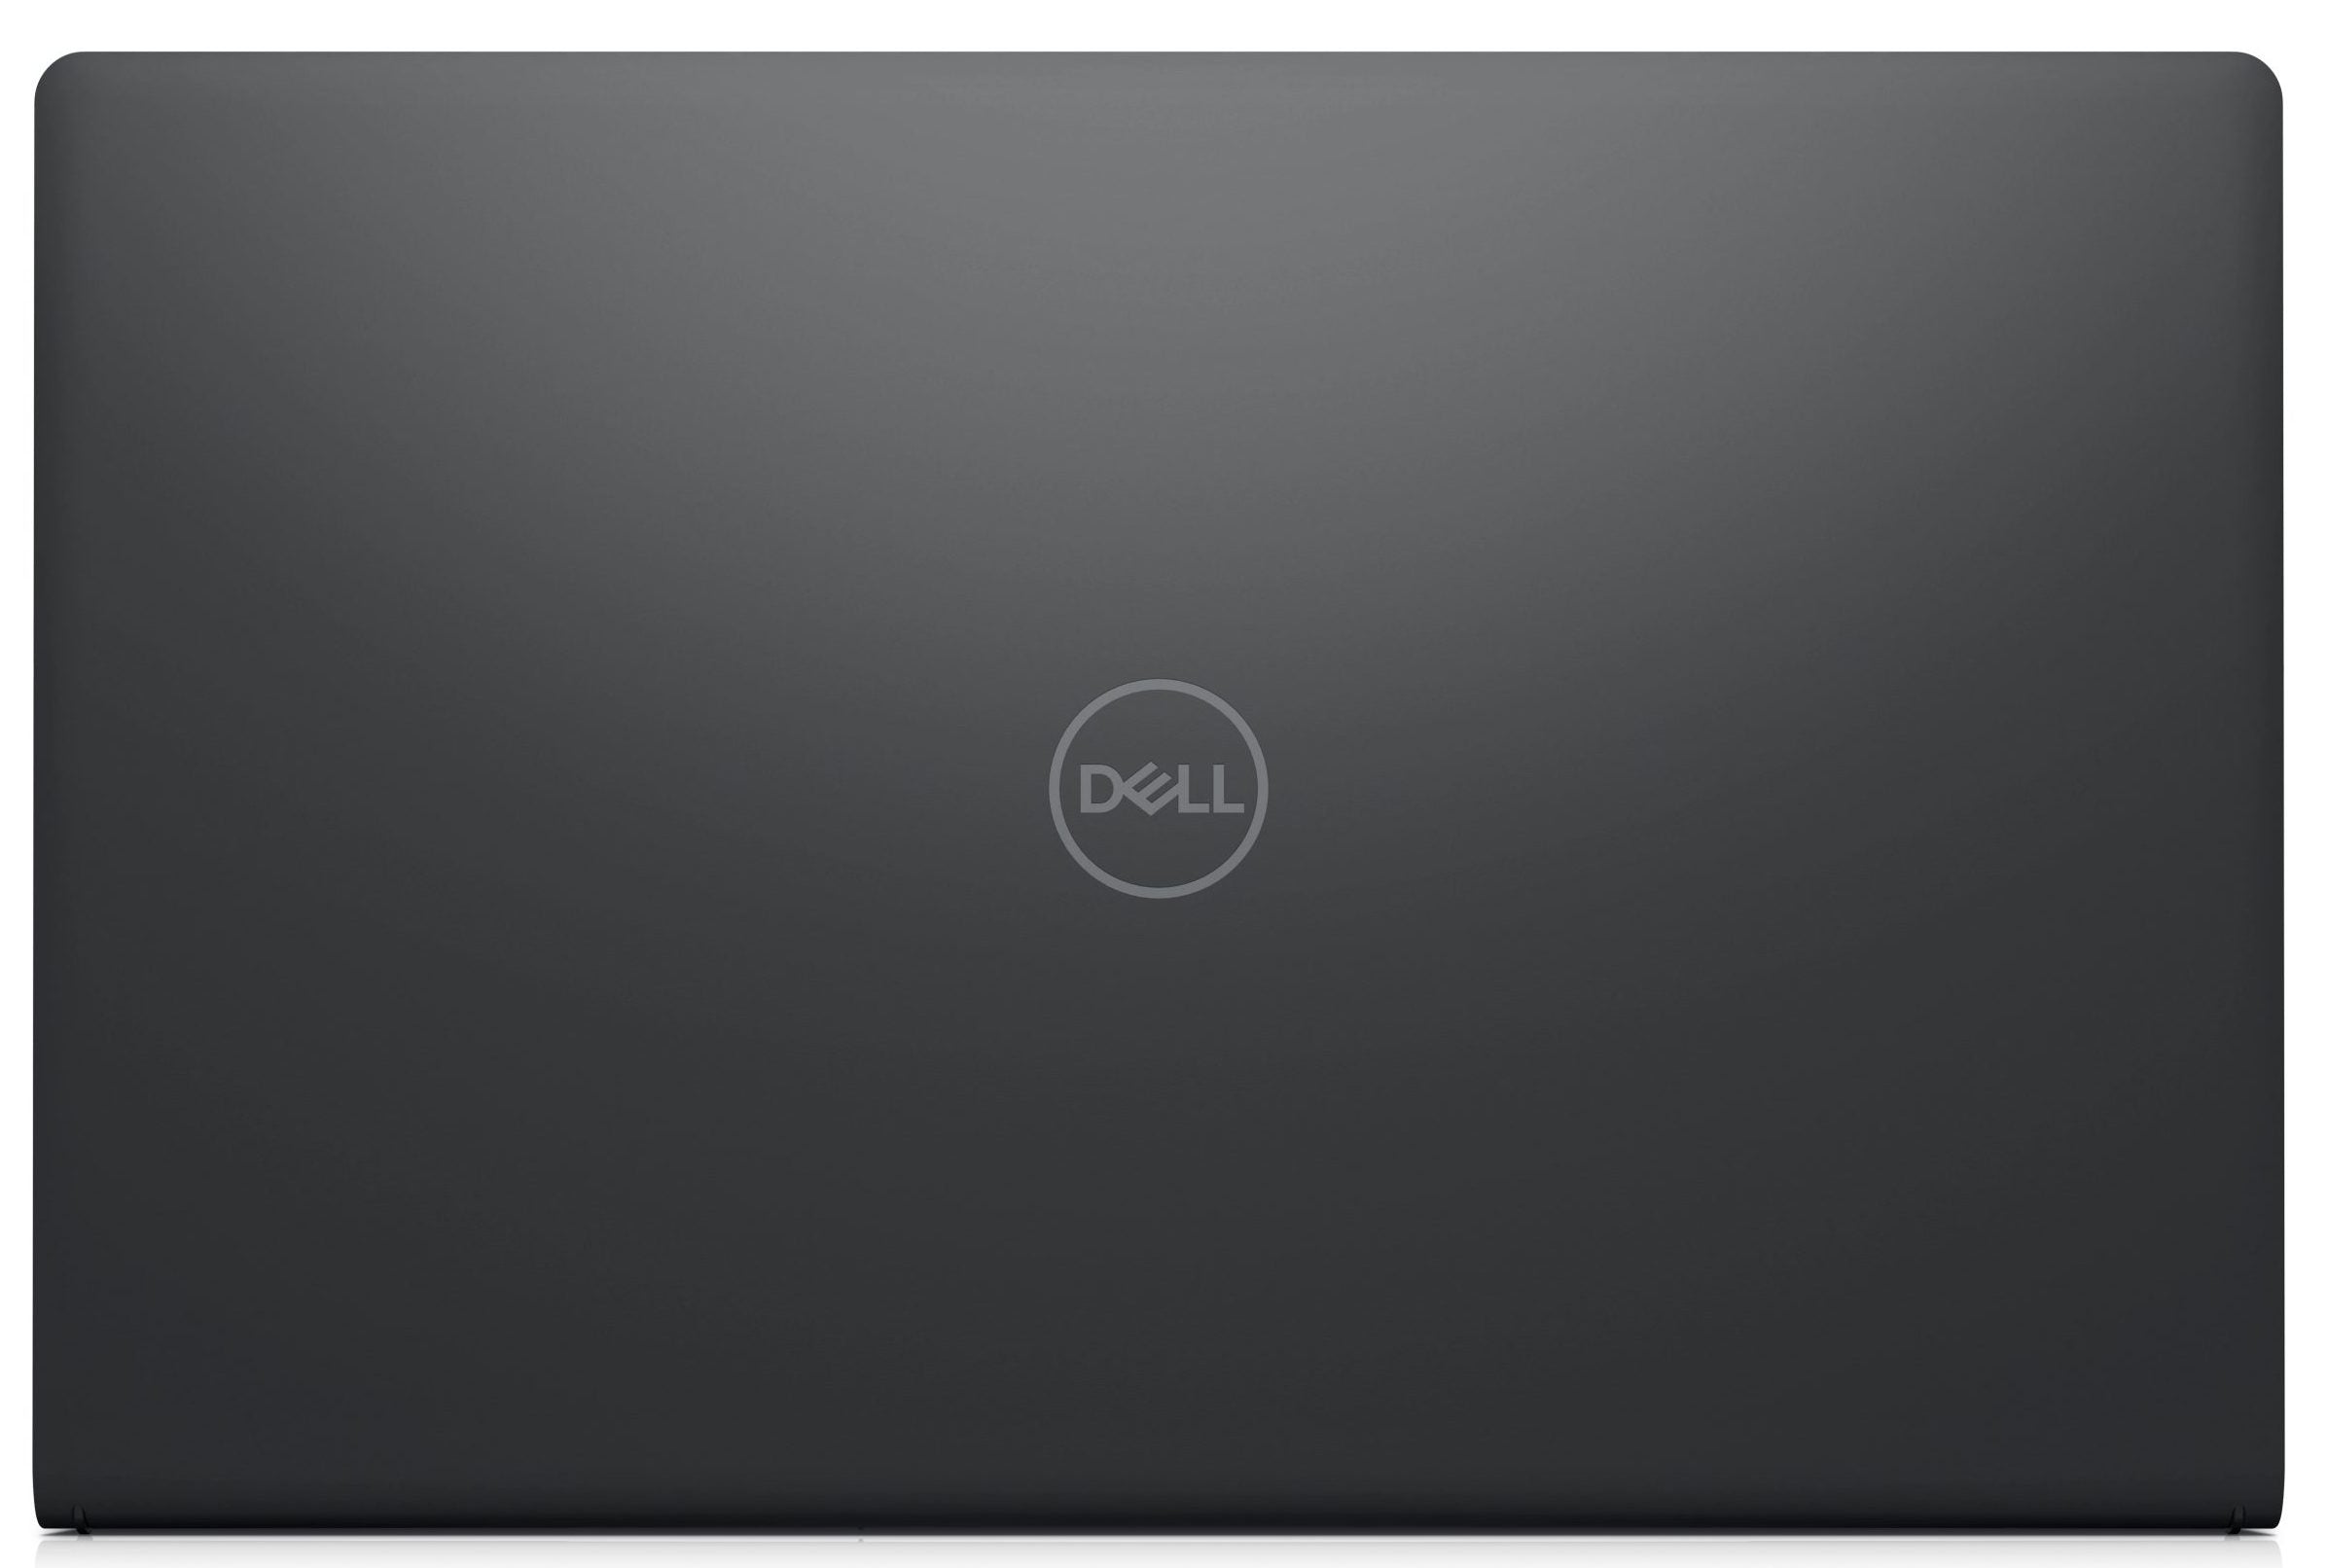 Dell Inspiron 15 3000 15.6" Notebook i7-1165G7 16GB DDR4 256GB NVMe M.2 PCI Express 1TB HDD Touchscreen Win11 Home  - Grade B